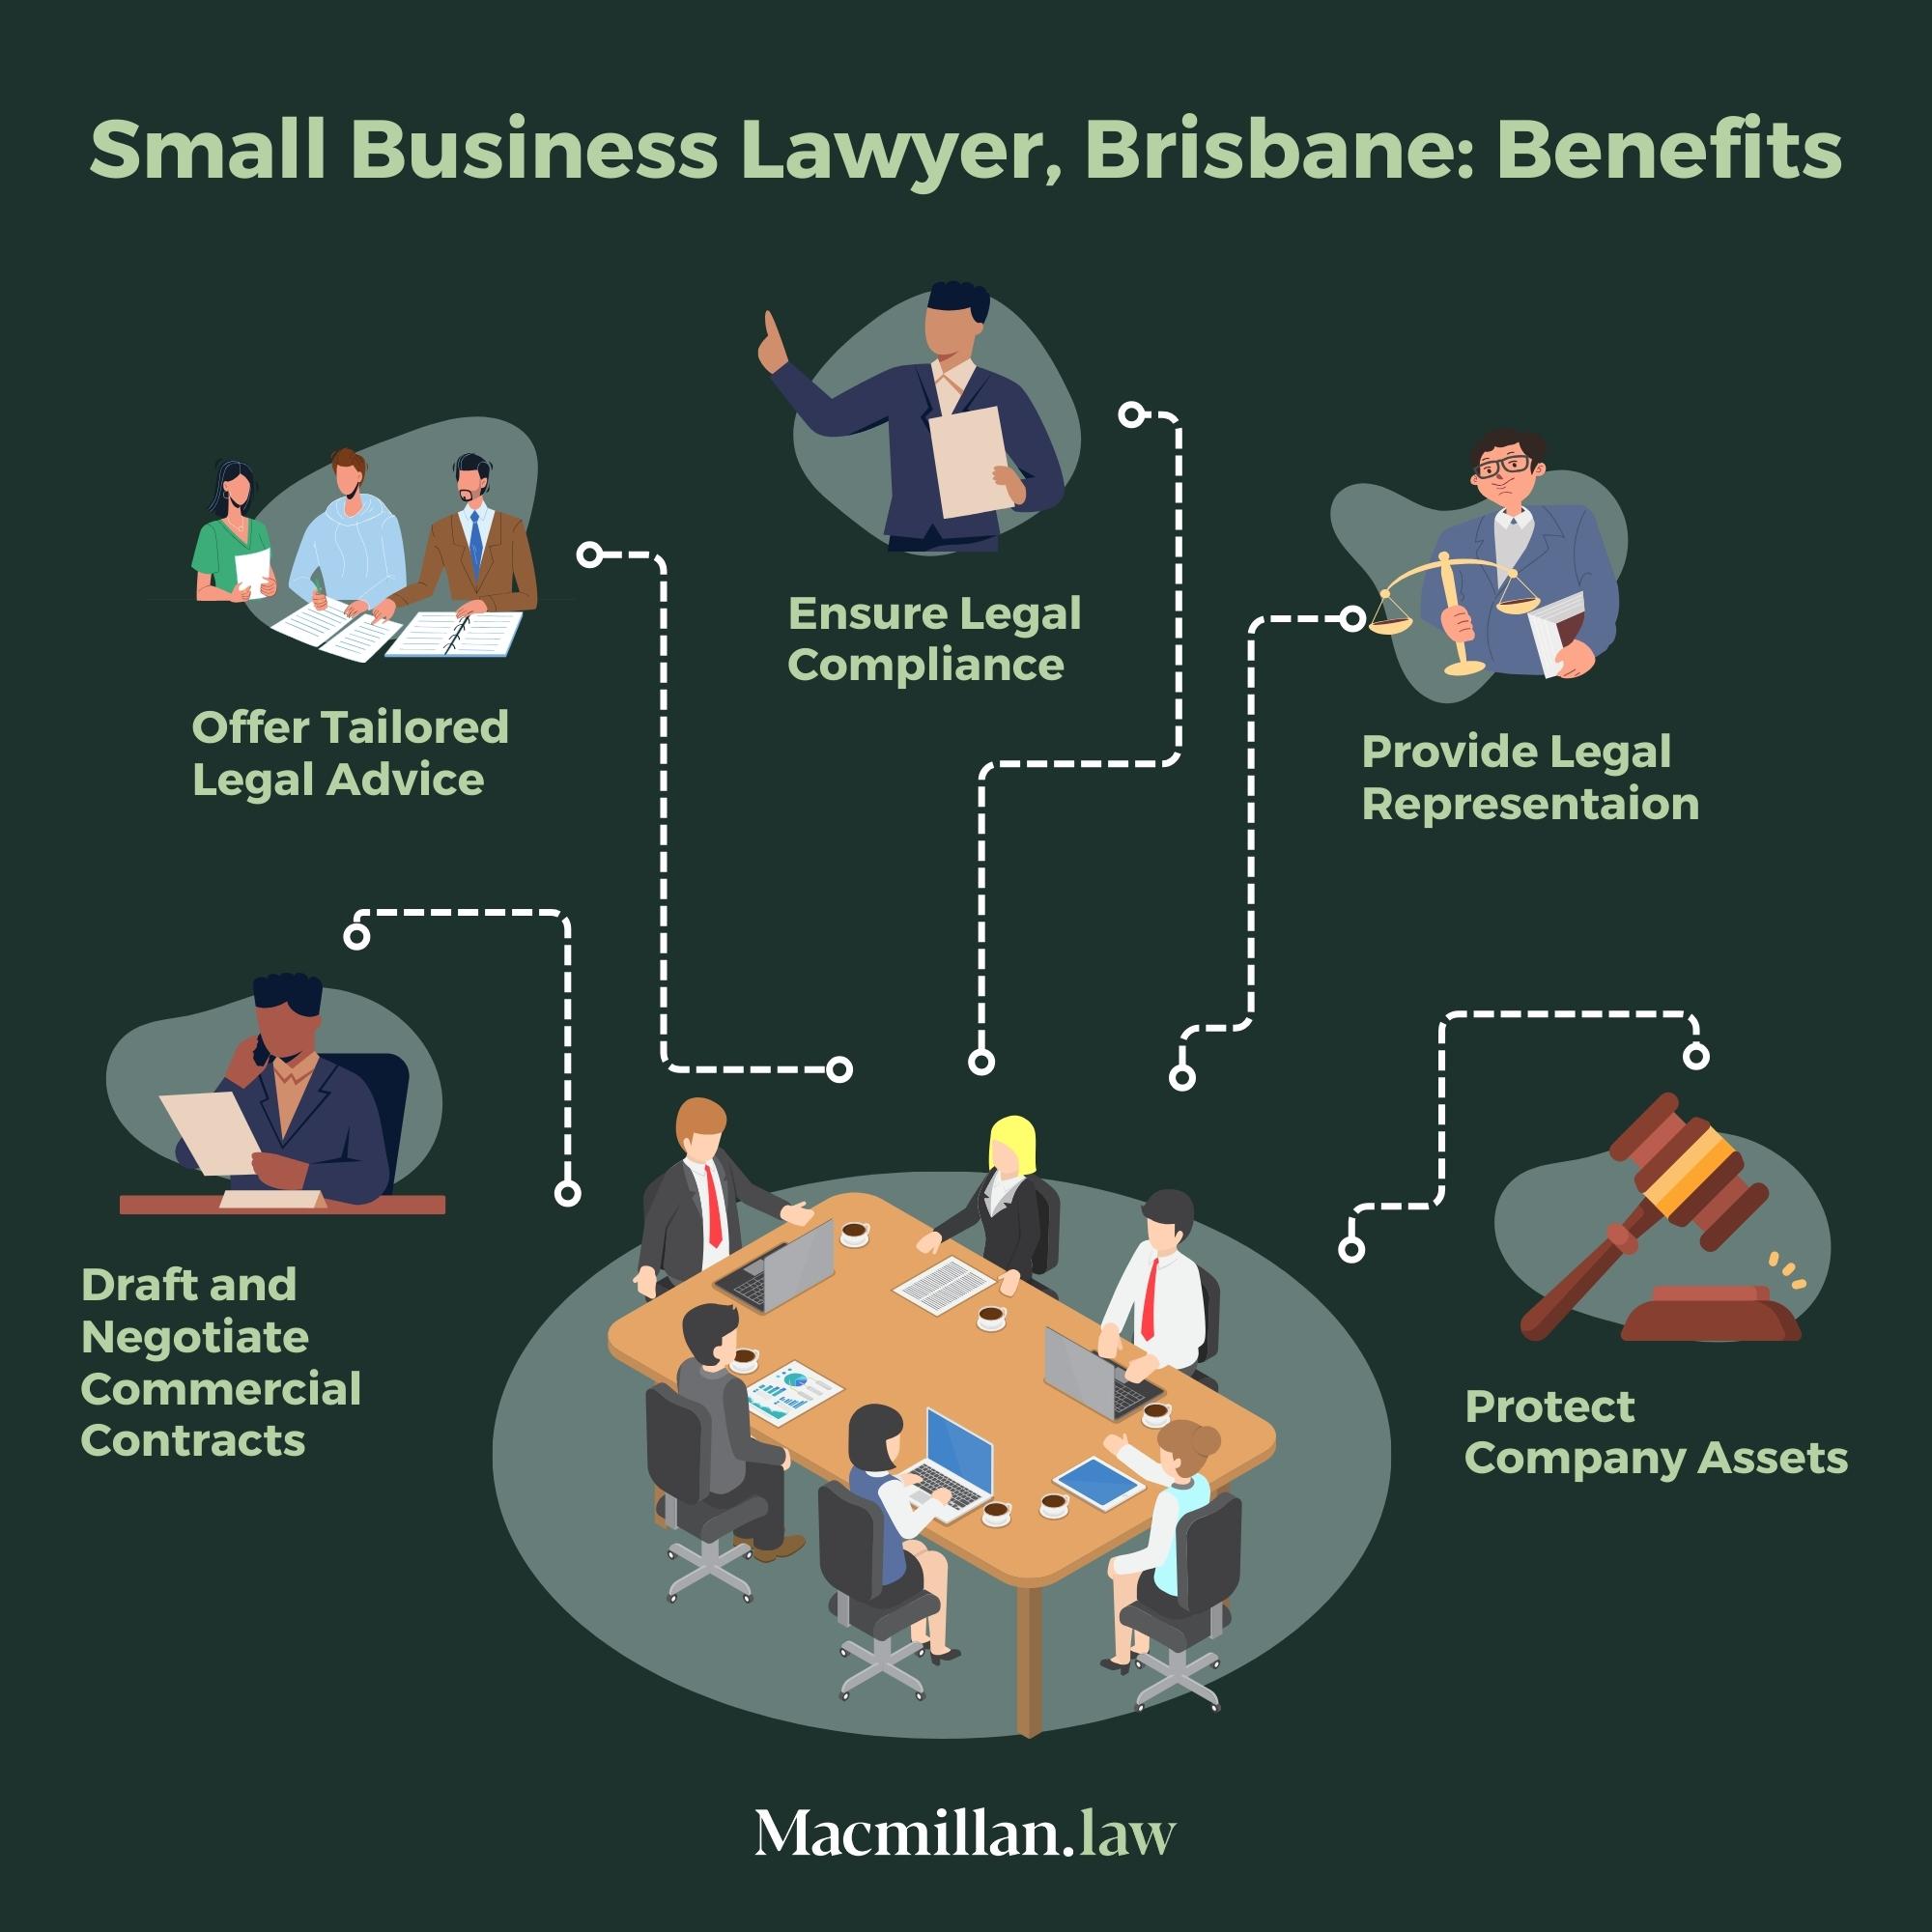 Benefits Of Hiring A Business Lawyer In Brisbane For Your Small Or Medium Business